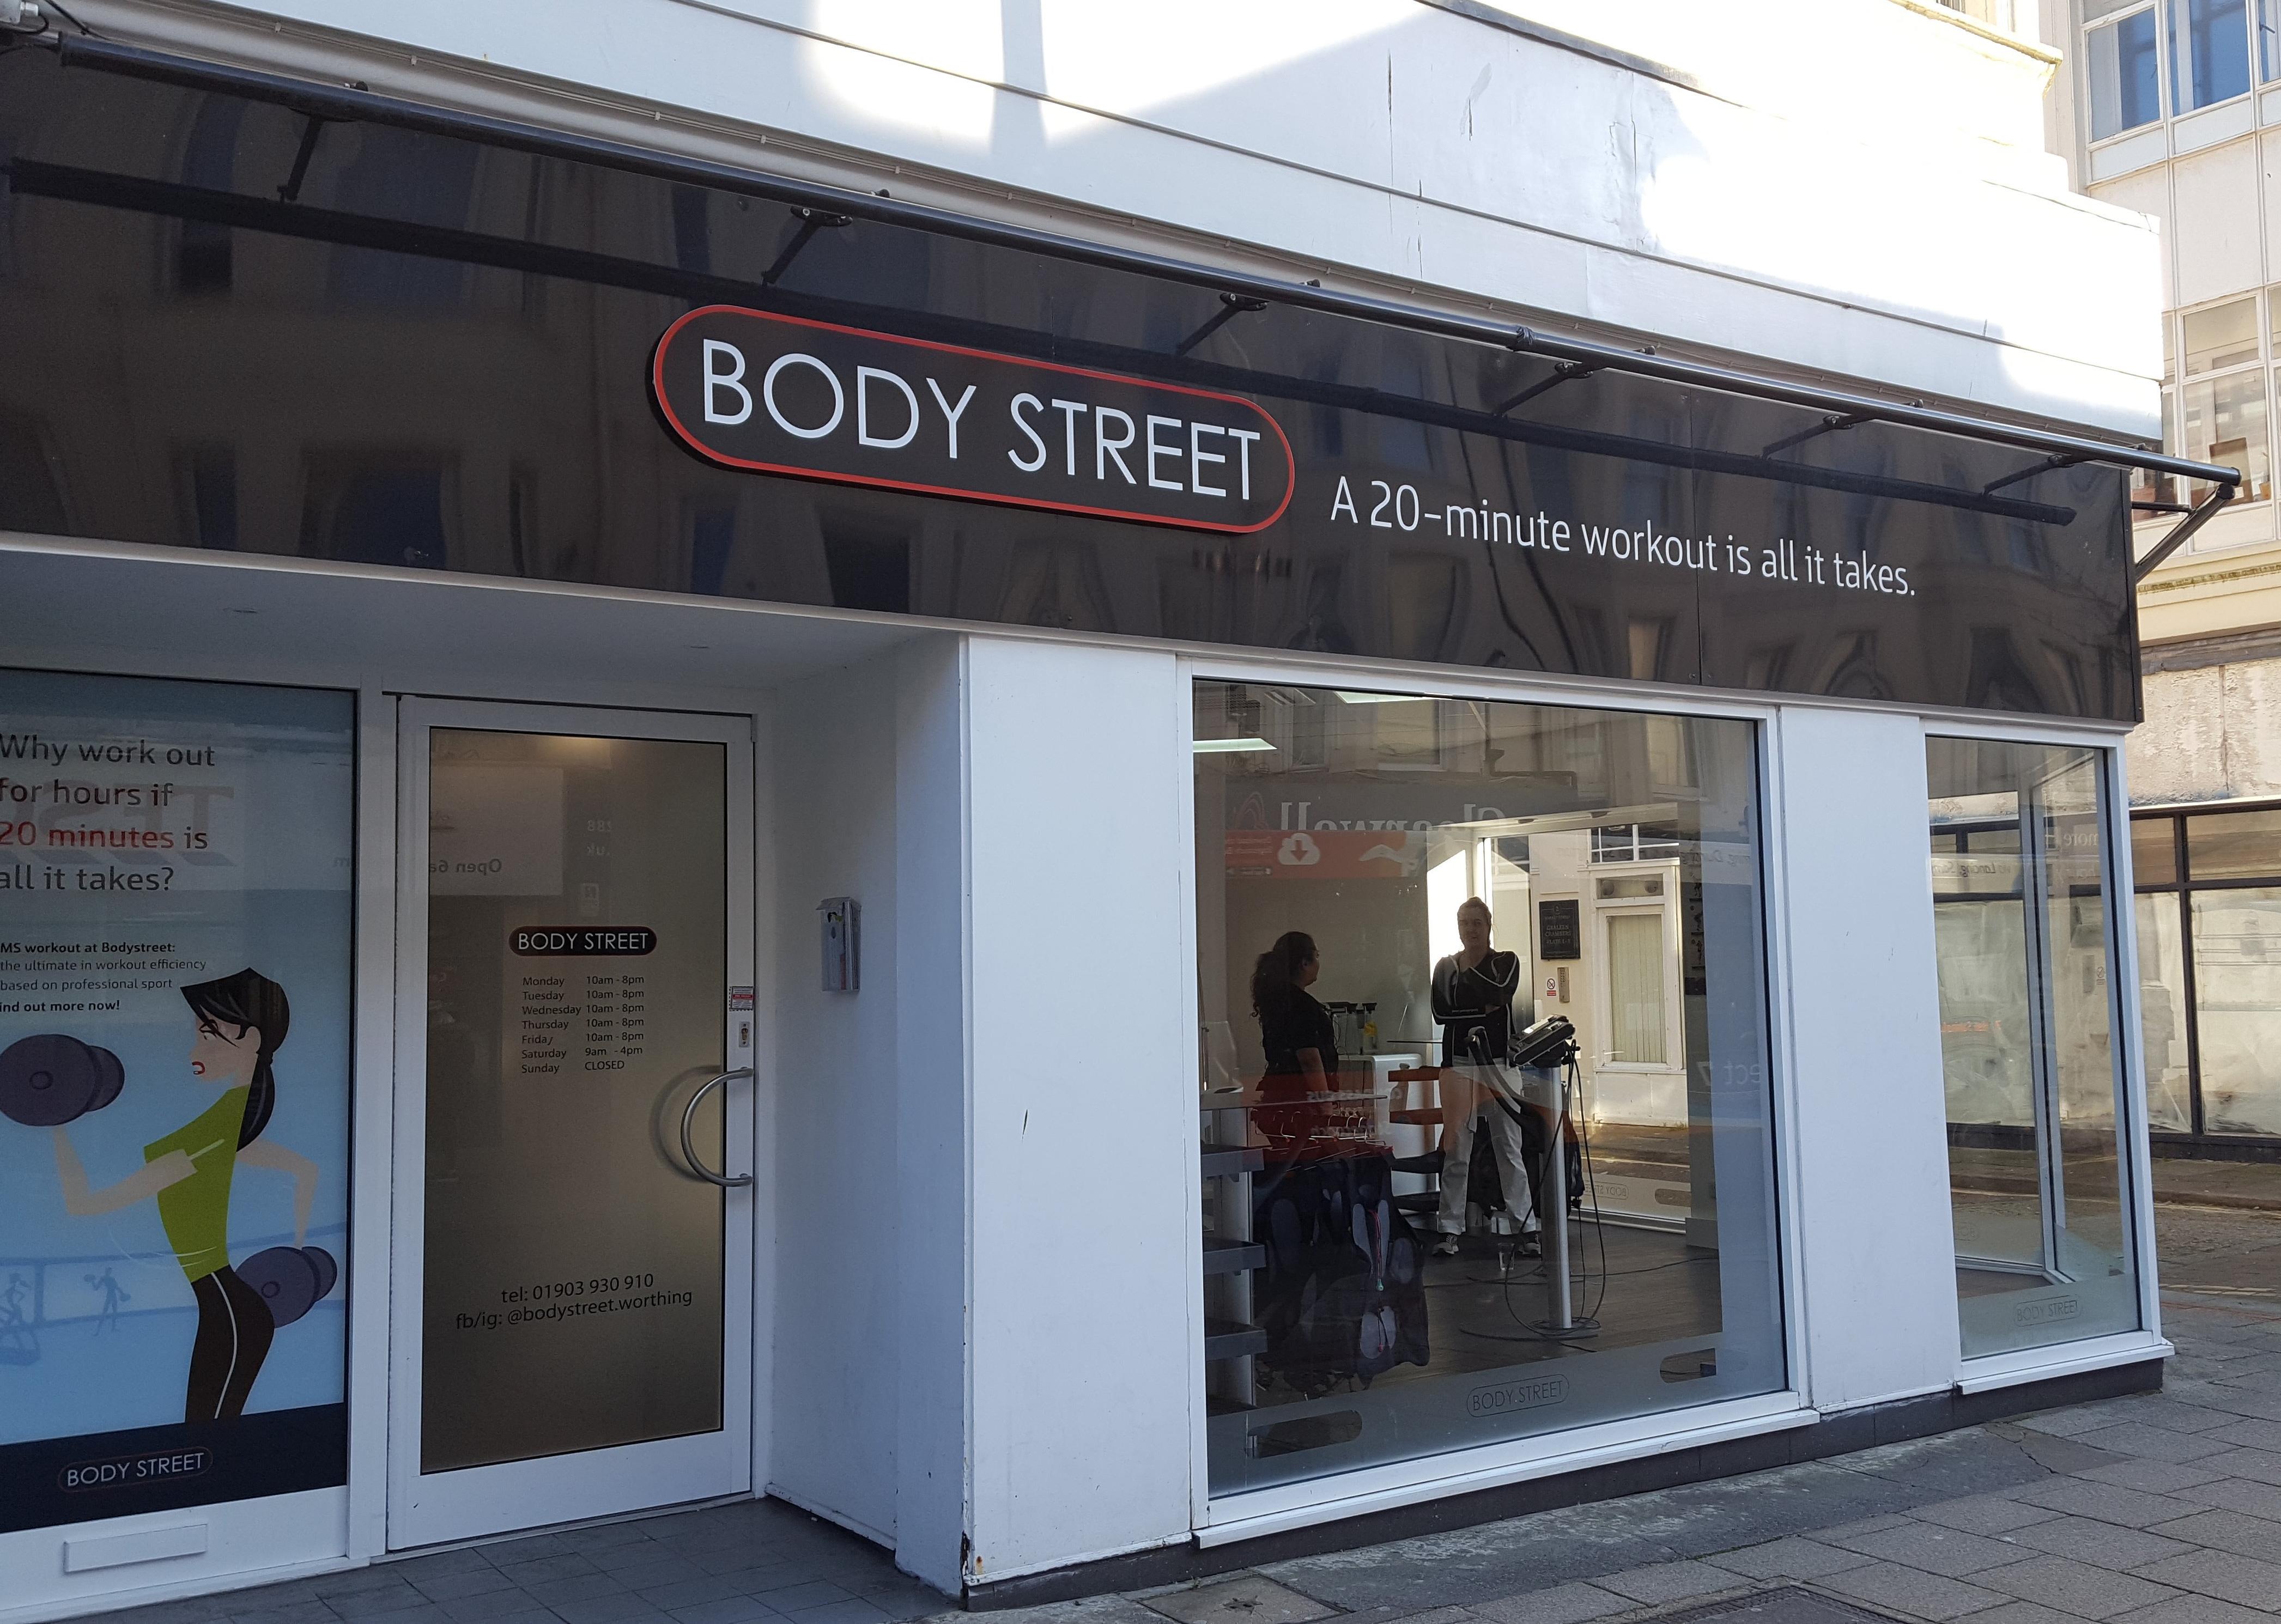 In August 2018, Body Street hooked us up to electrodes and brought us its 20-minute fat burning workouts